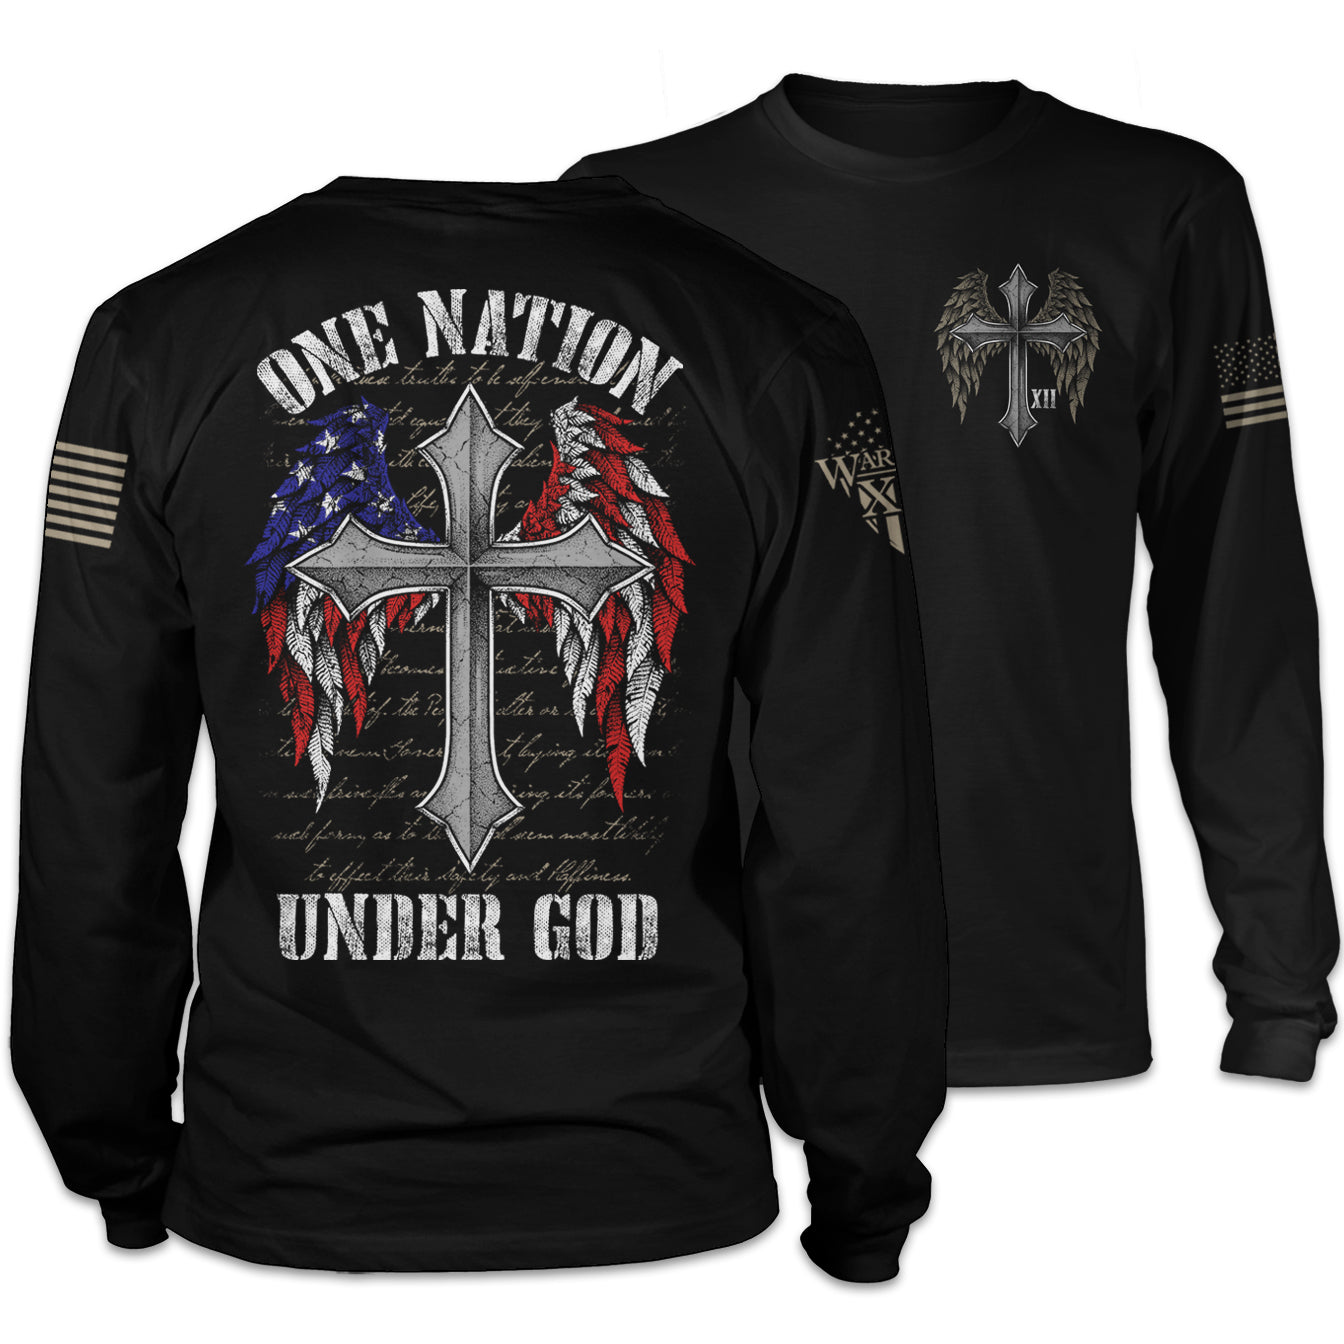 Front & back black long sleeve shirt with the words " one nation under God" with a cross with USA Flag wings printed on the shirt.